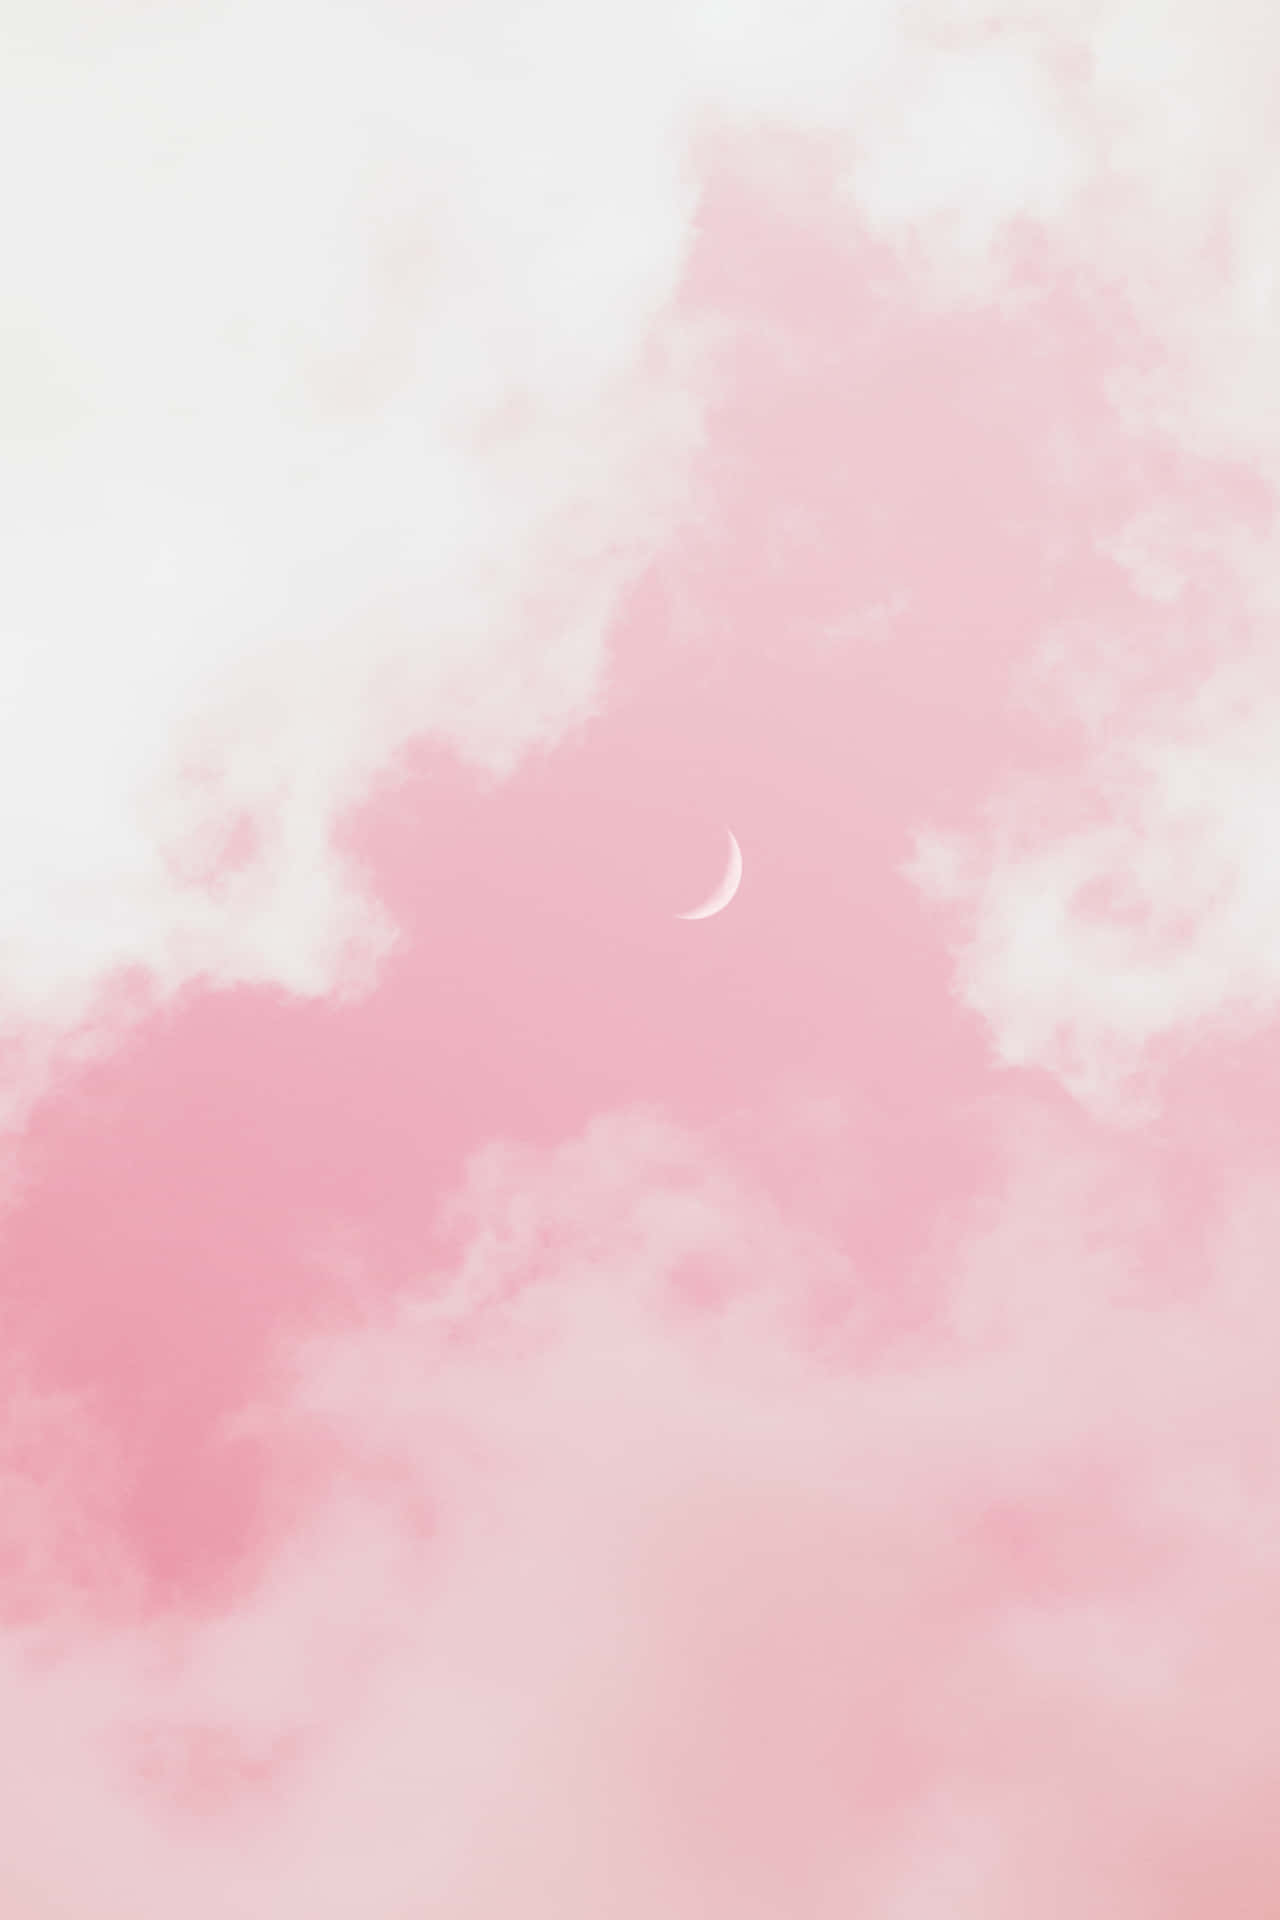 Download Crescent Moon Pink Aesthetic Background | Wallpapers.com